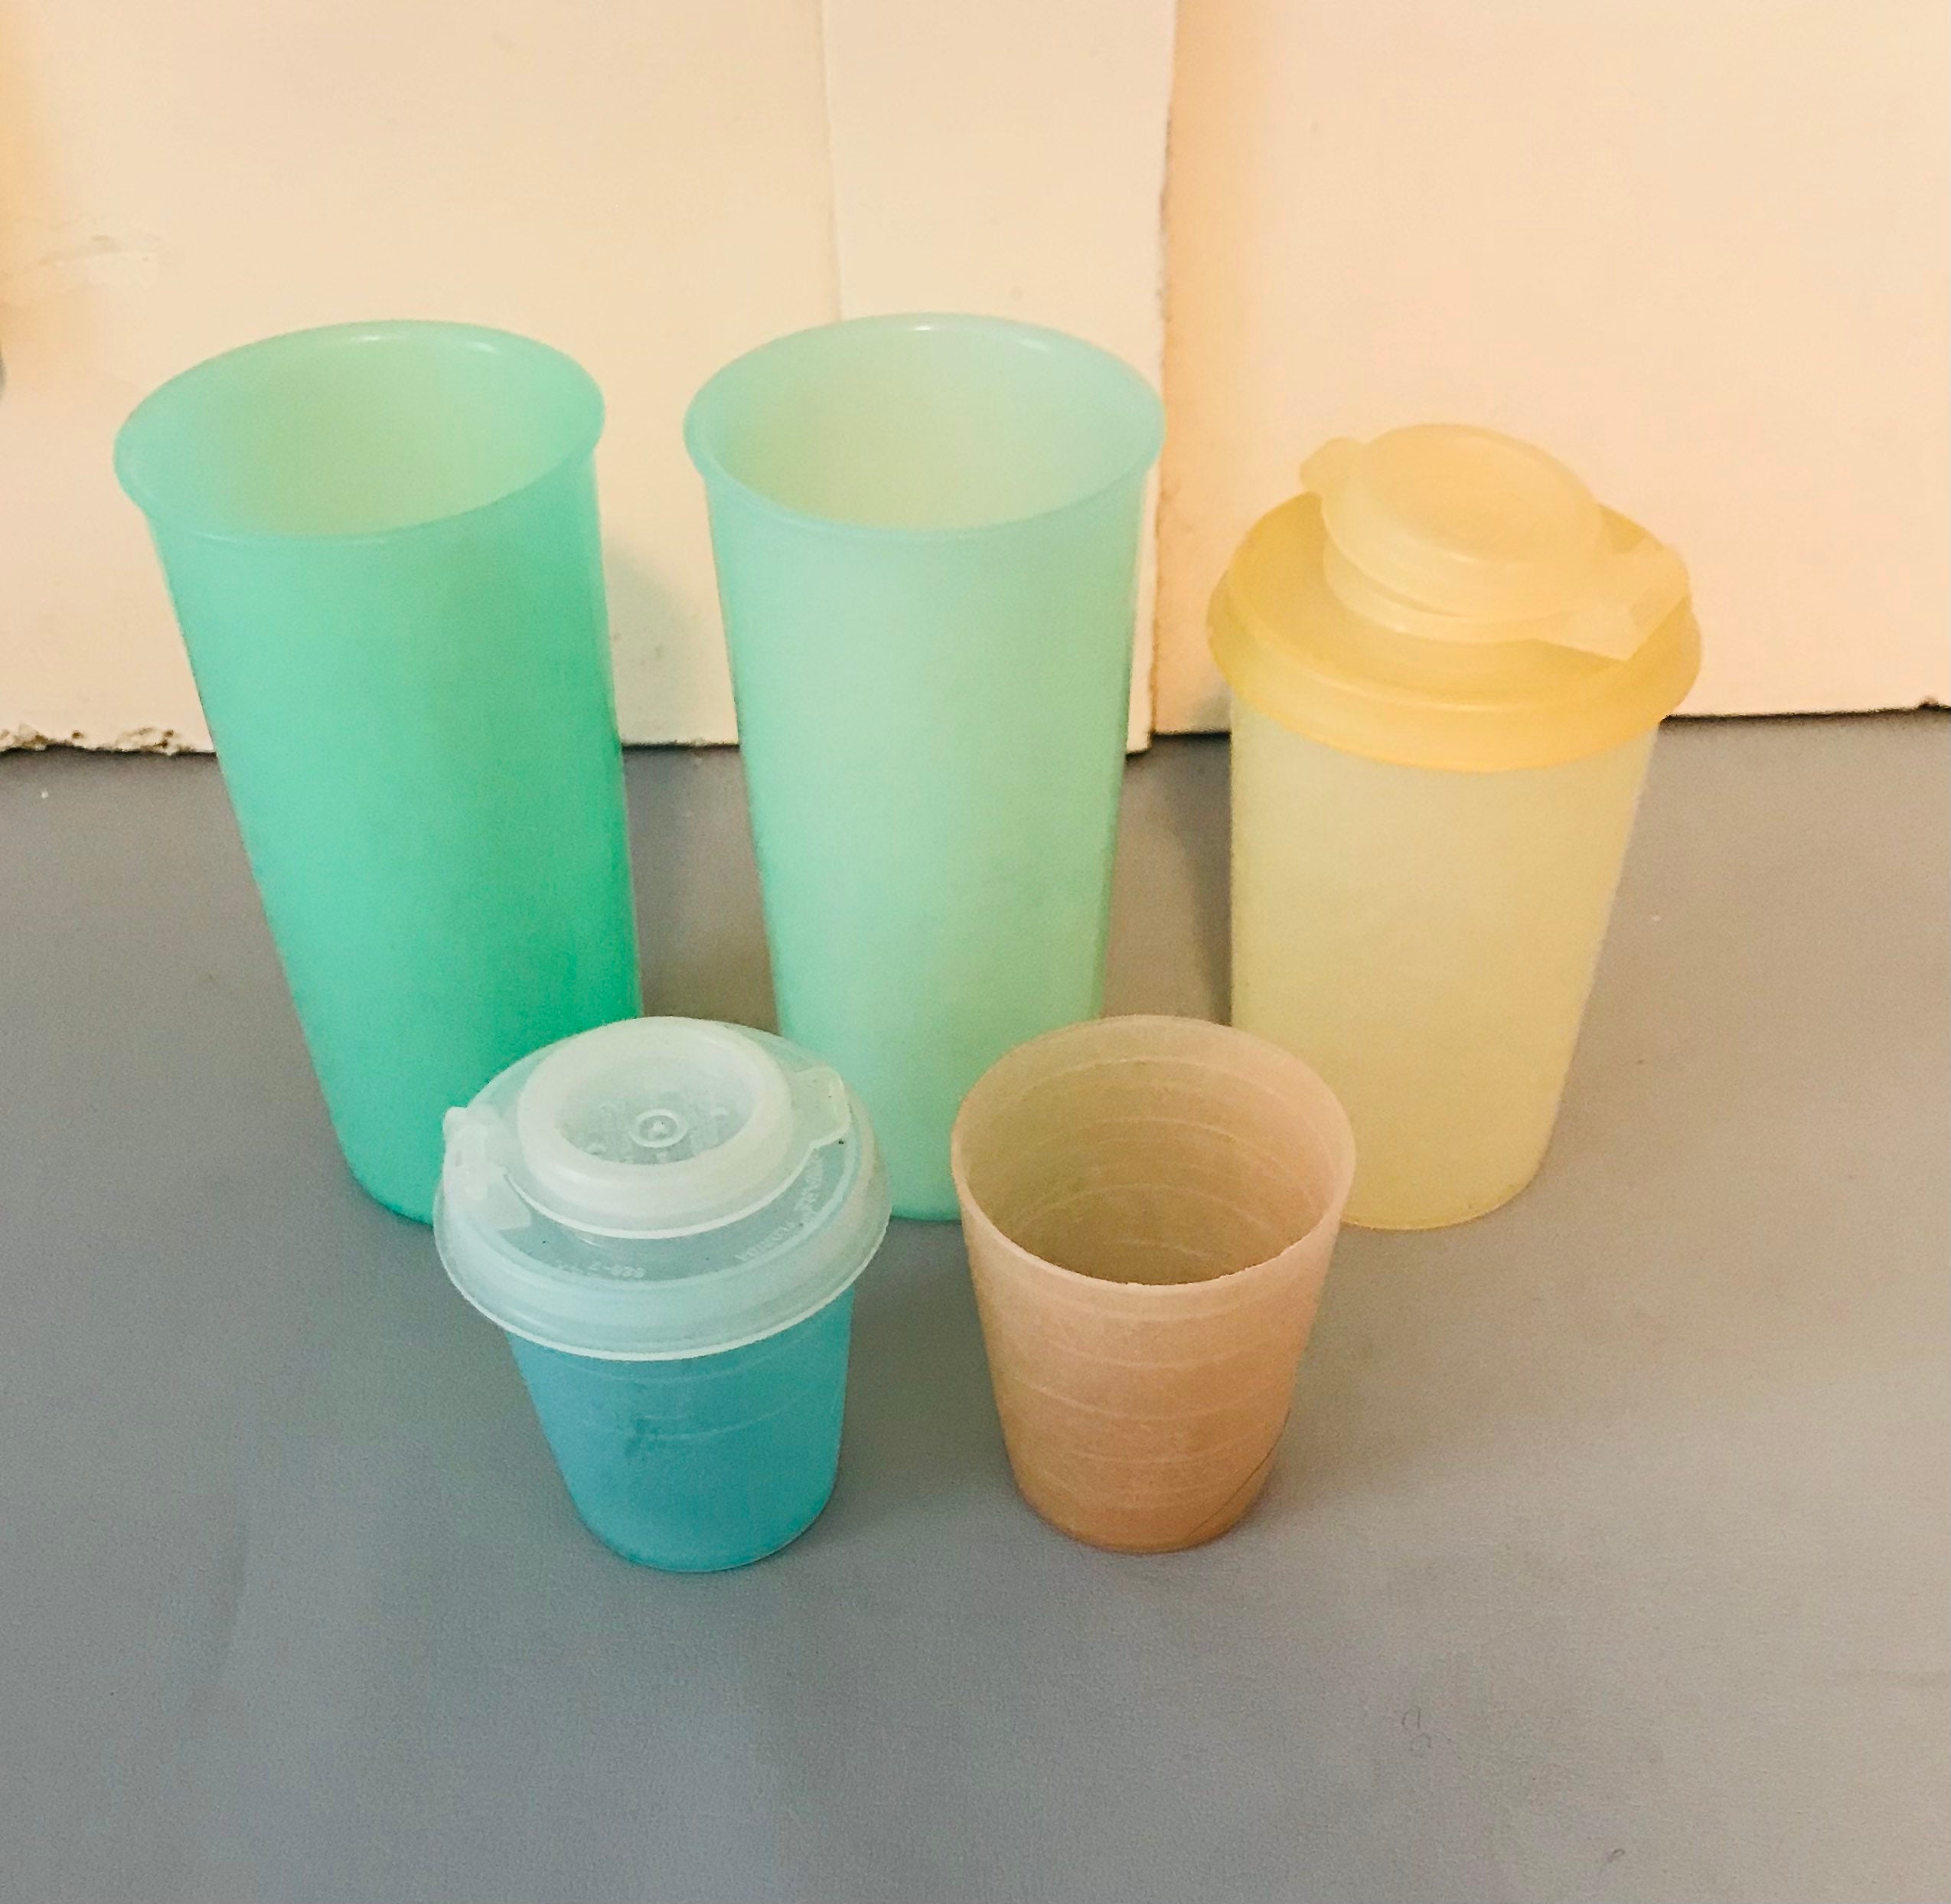 Vintage Tupperware Midget Tiny Medication Cups 4789A 101 Container 2oz  Plastic Cups Salad Dressing, Carry Along Pastel or Red & Clear -  Israel